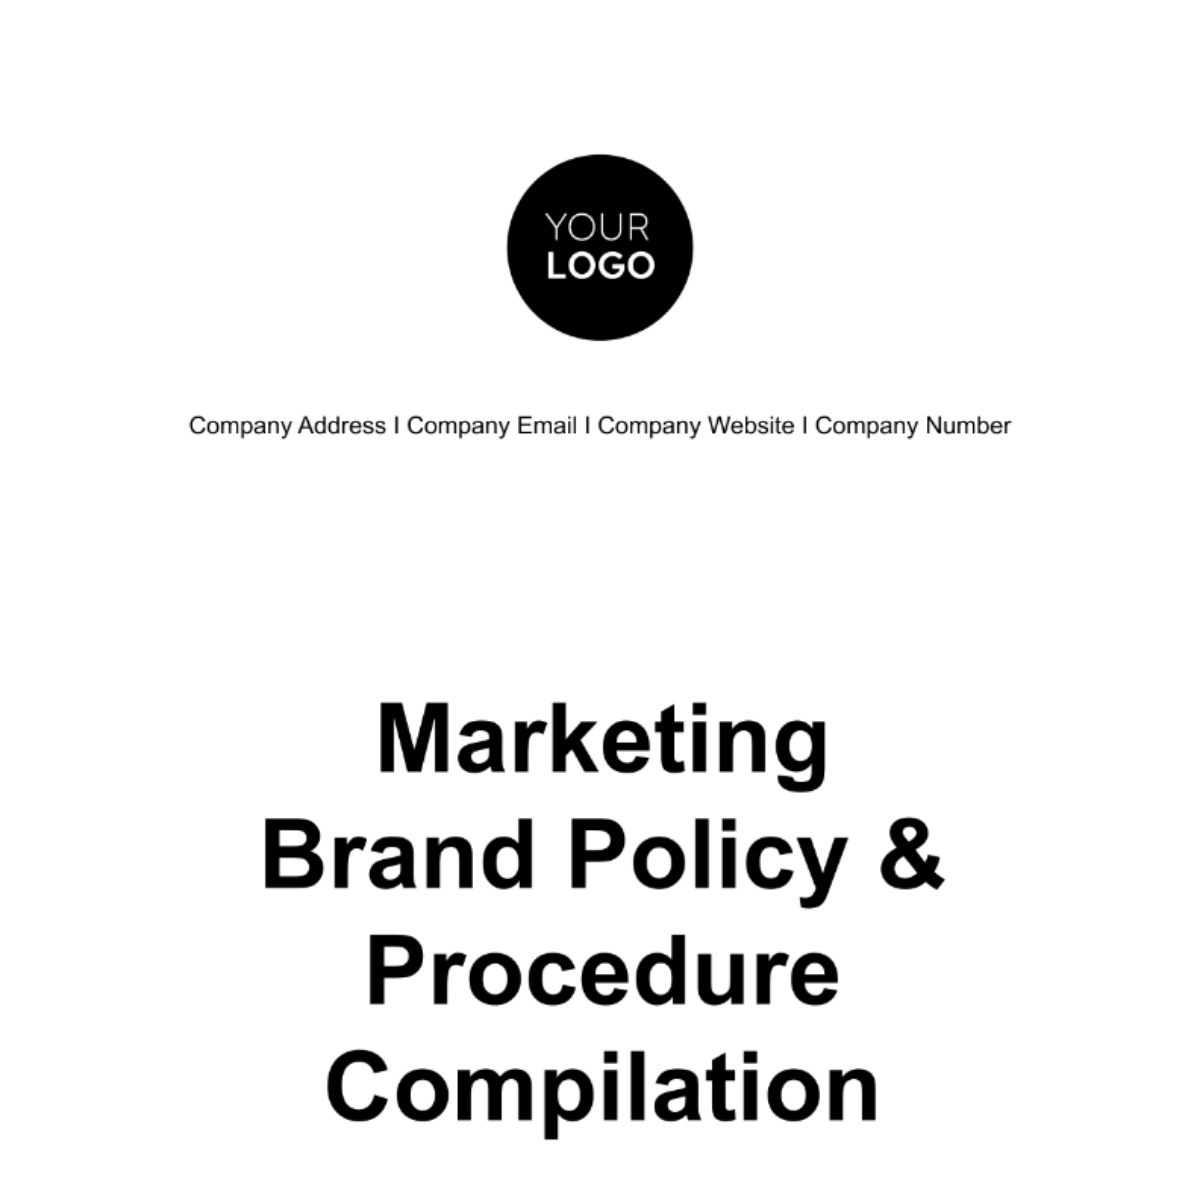 Marketing Brand Policy & Procedure Compilation Template